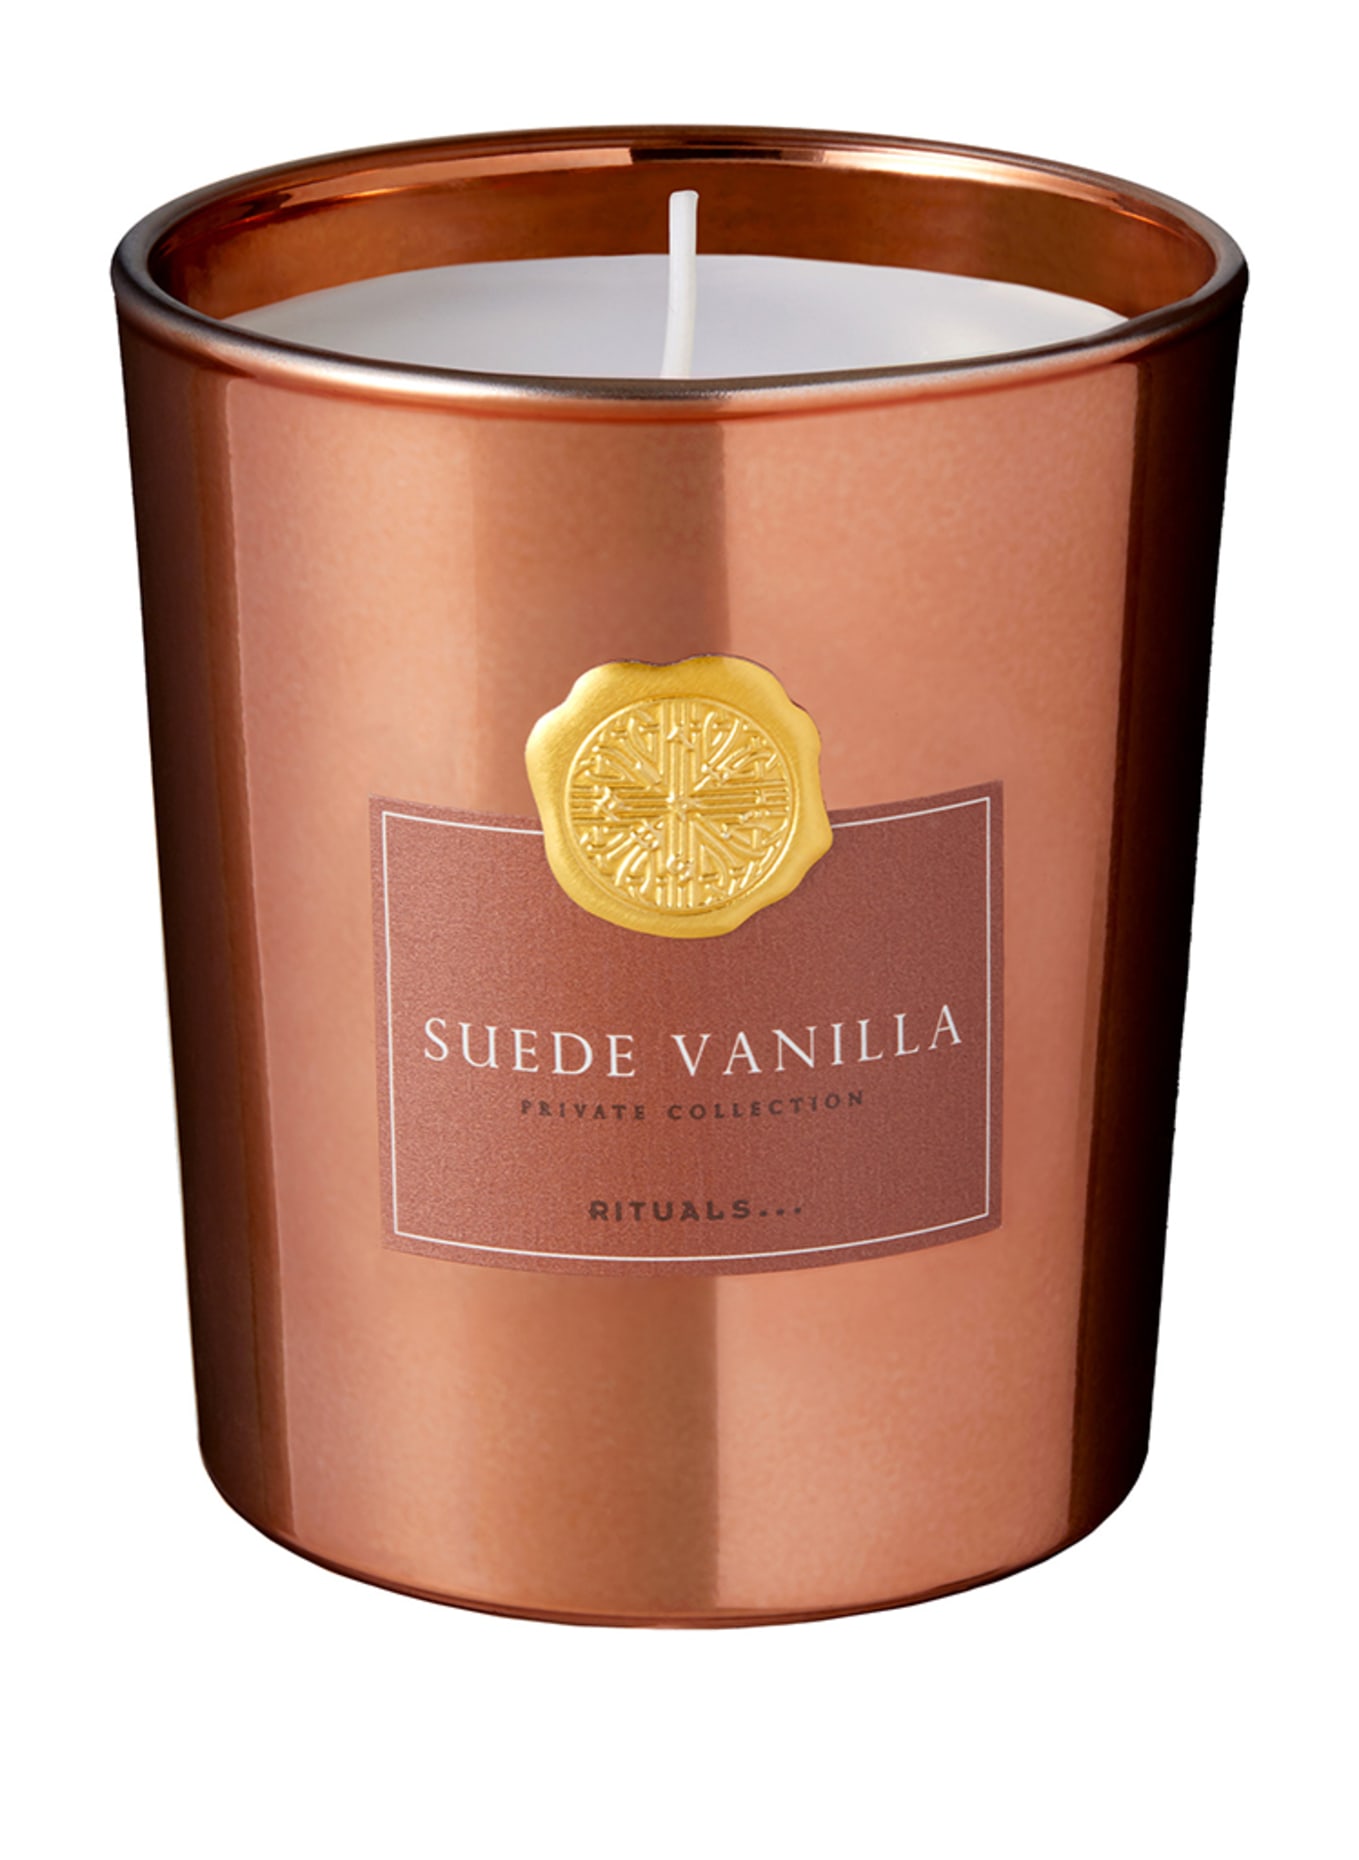 Rituals Savage Garden Scented Candle » Kerze